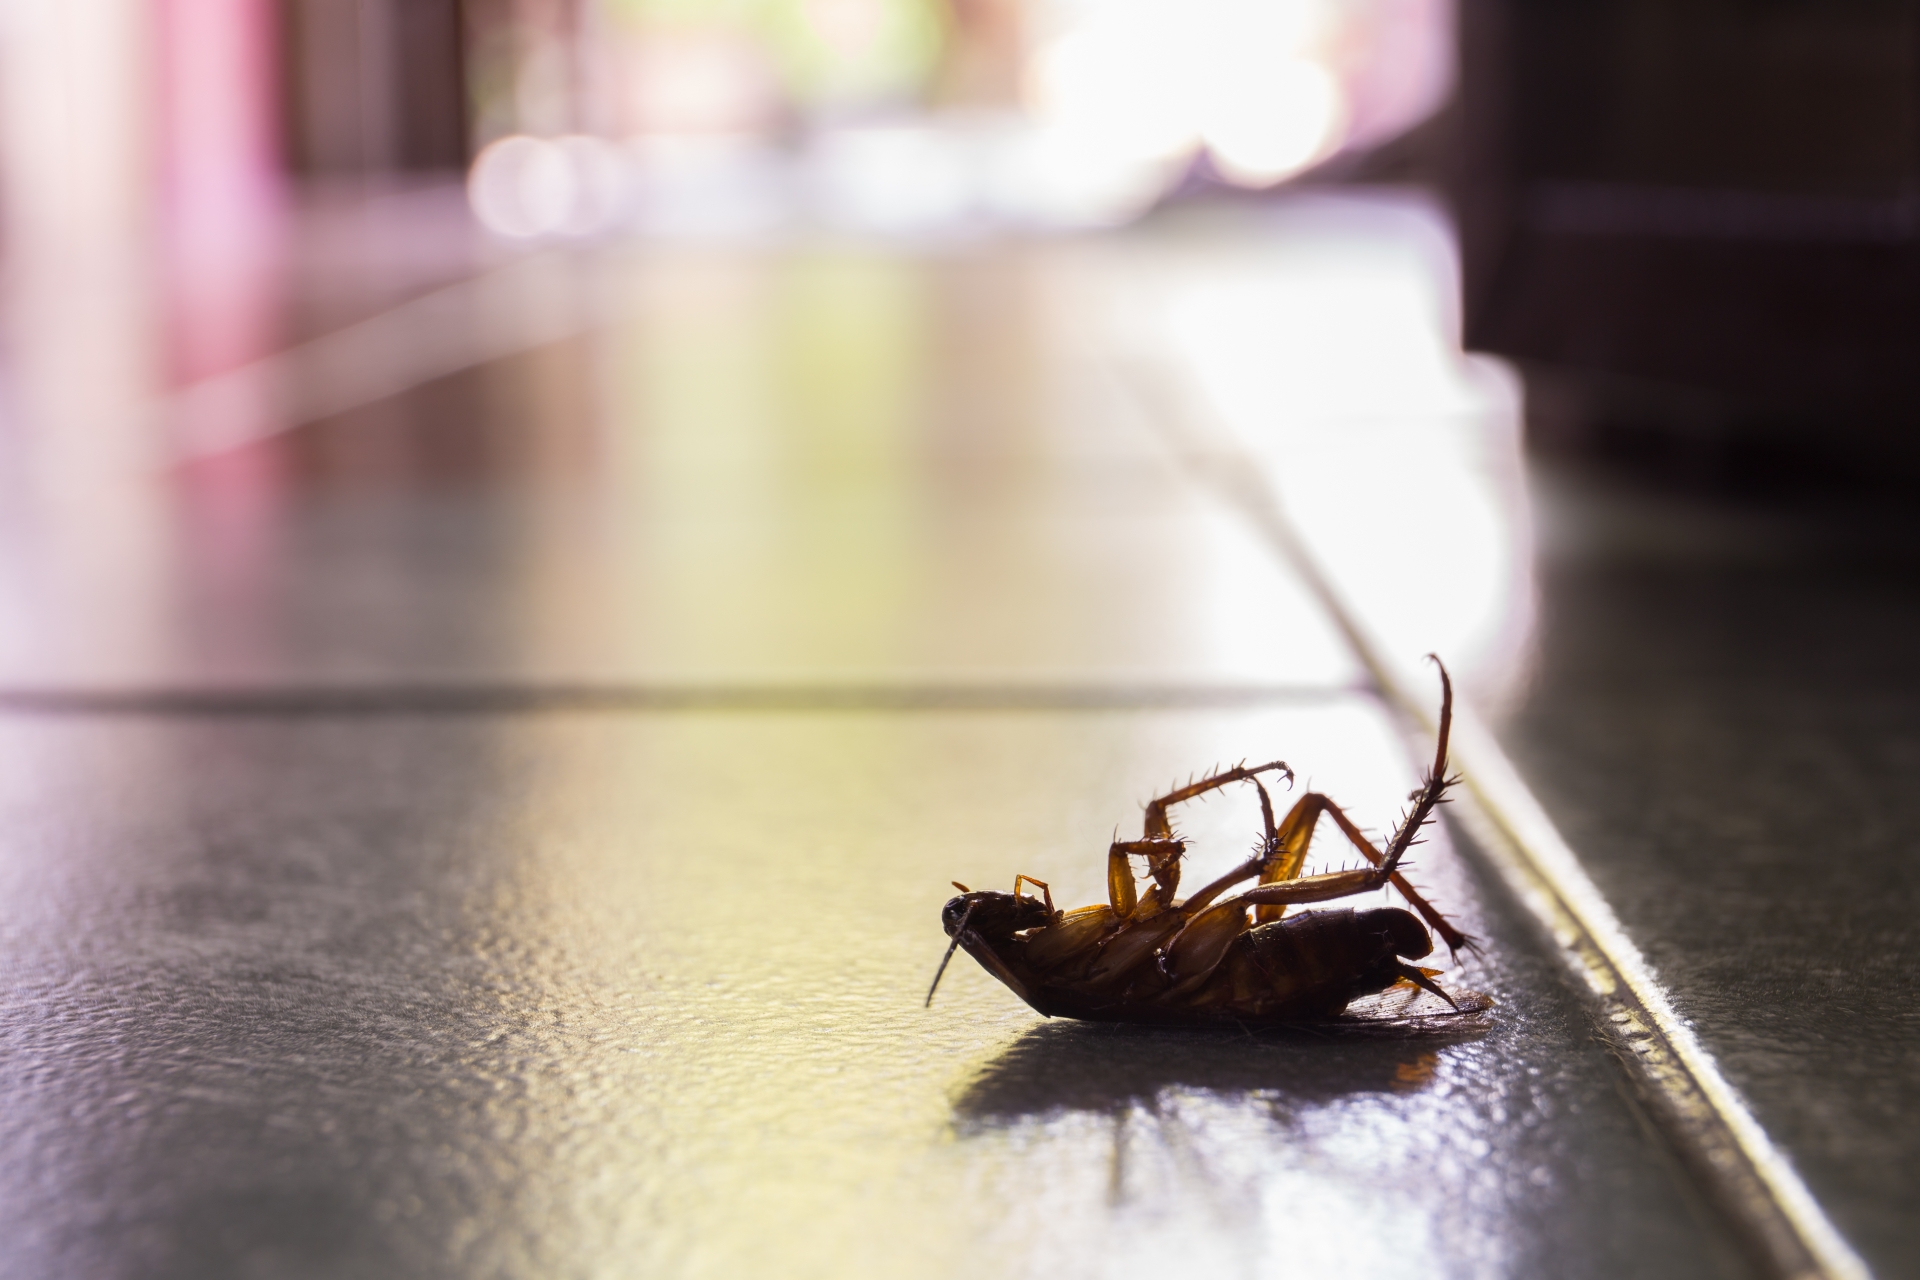 Cockroach Control, Pest Control in Caterham, Chaldon, Woldingham, CR3. Call Now 020 8166 9746